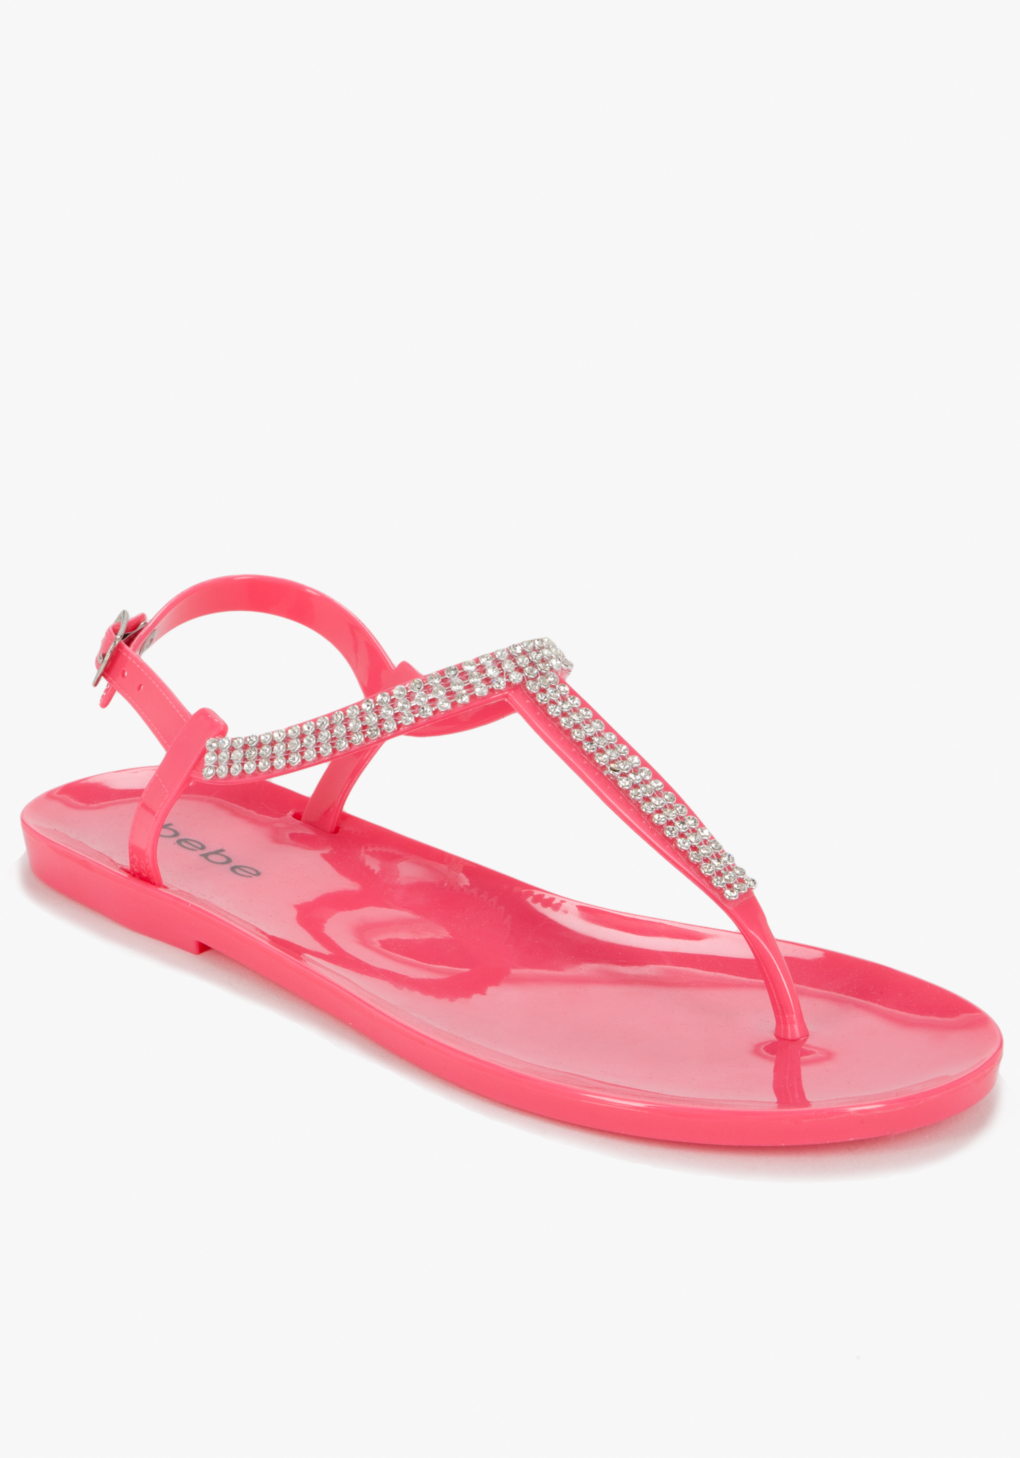 Bebe Marina Jelly Sandal in Pink (hot pink) | Lyst